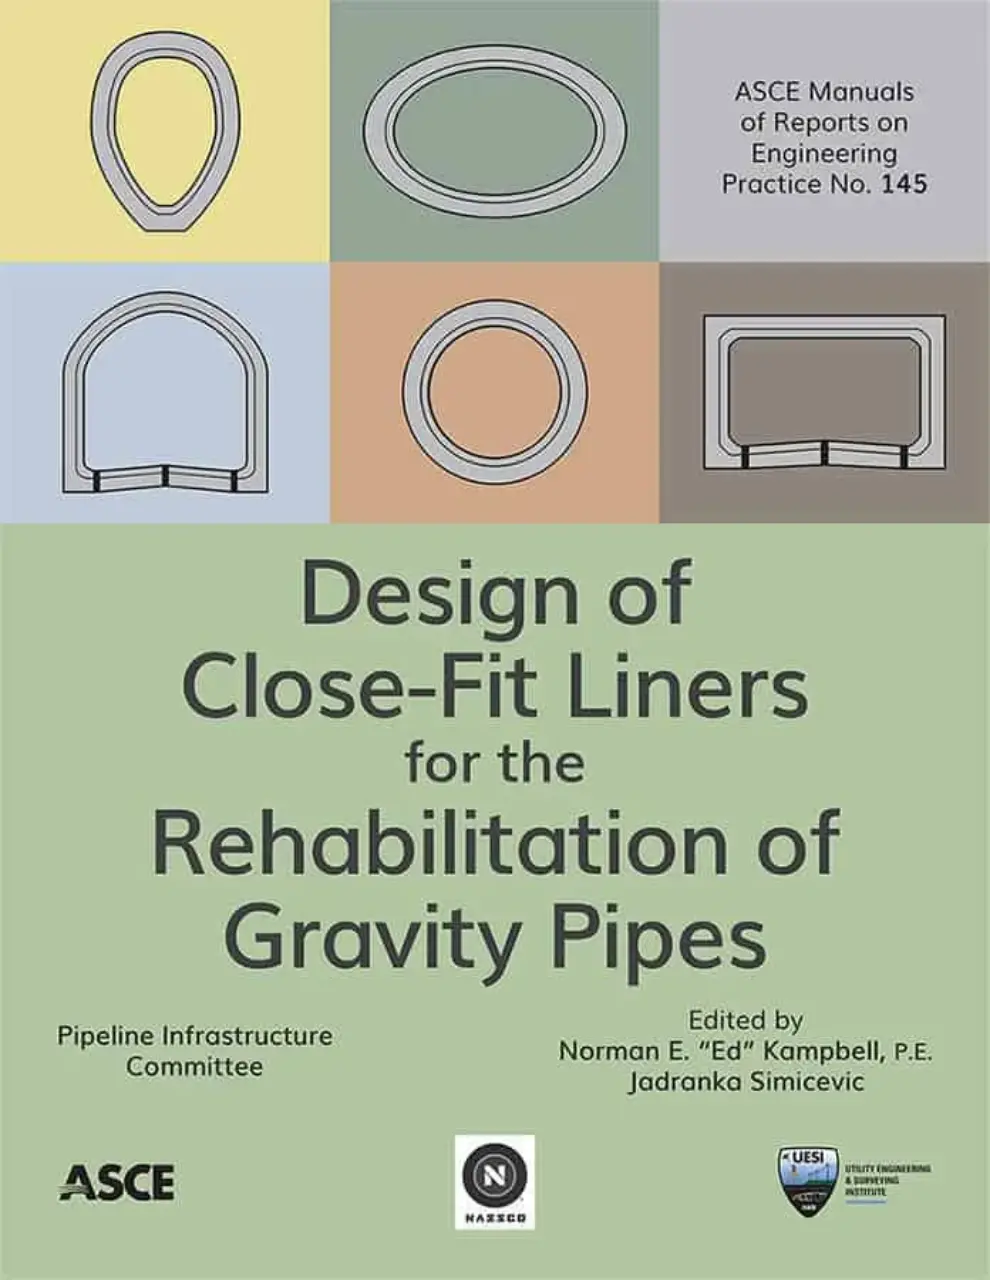 New ASCE Manual of Practice 145 Provides Guidance on Liner Design for Gravity Pipes